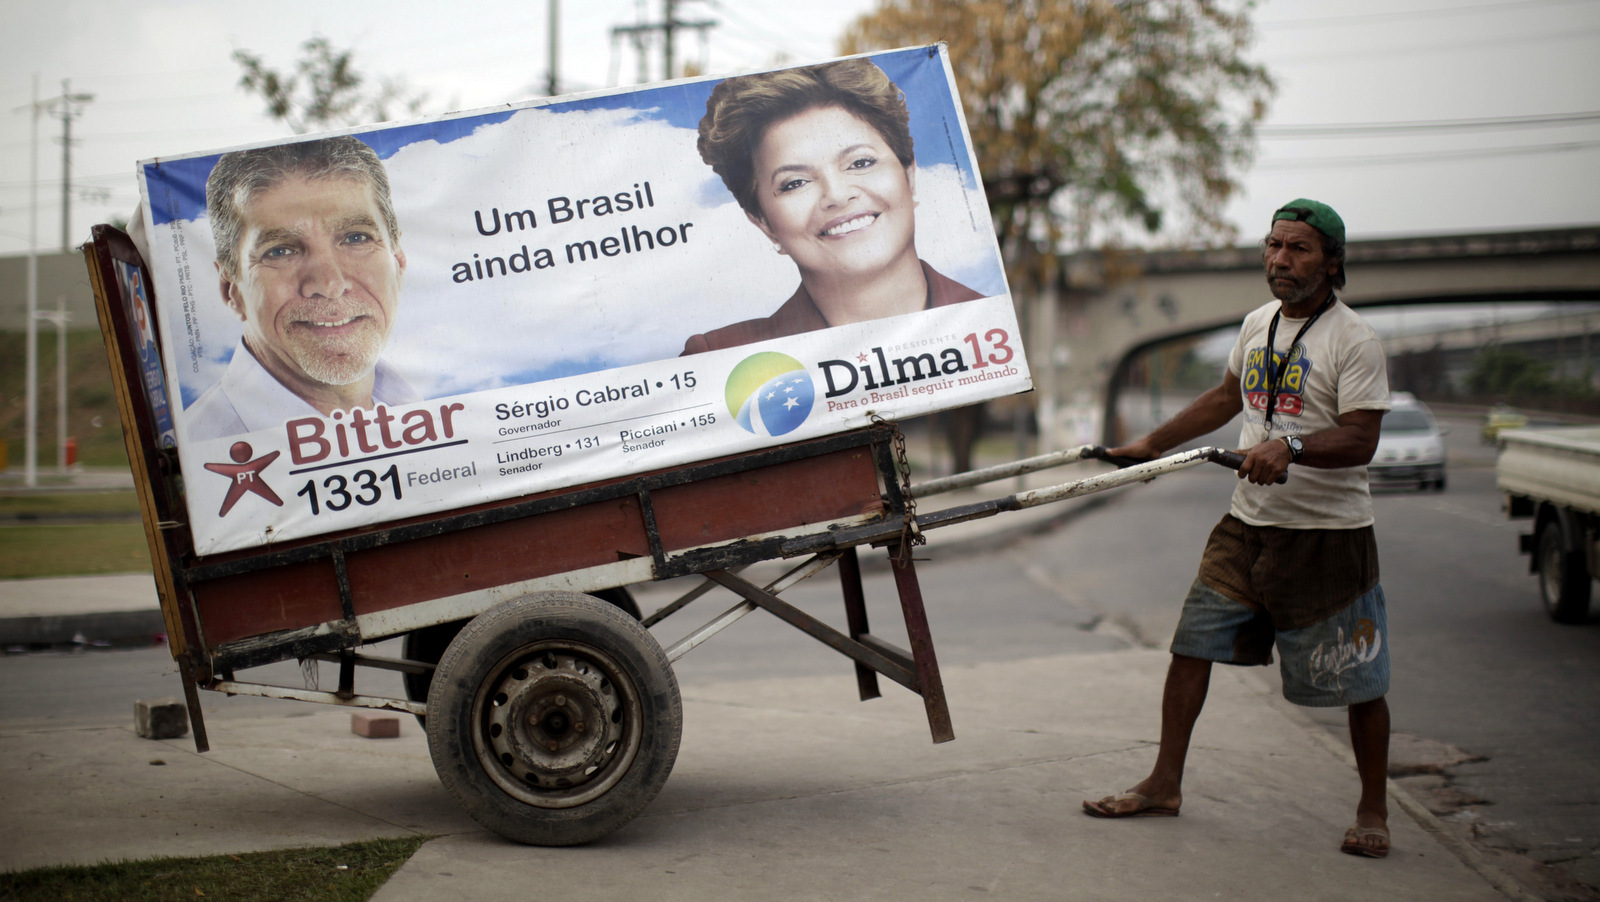 A man pulls a cart with an electoral poster of Workers Party presidential candidate Dilma Rousseff, right, at Manguinhos slum in Rio de Janeiro, Brazil, Wednesday, Sept. 29, 2010. (AP/Felipe Dana)